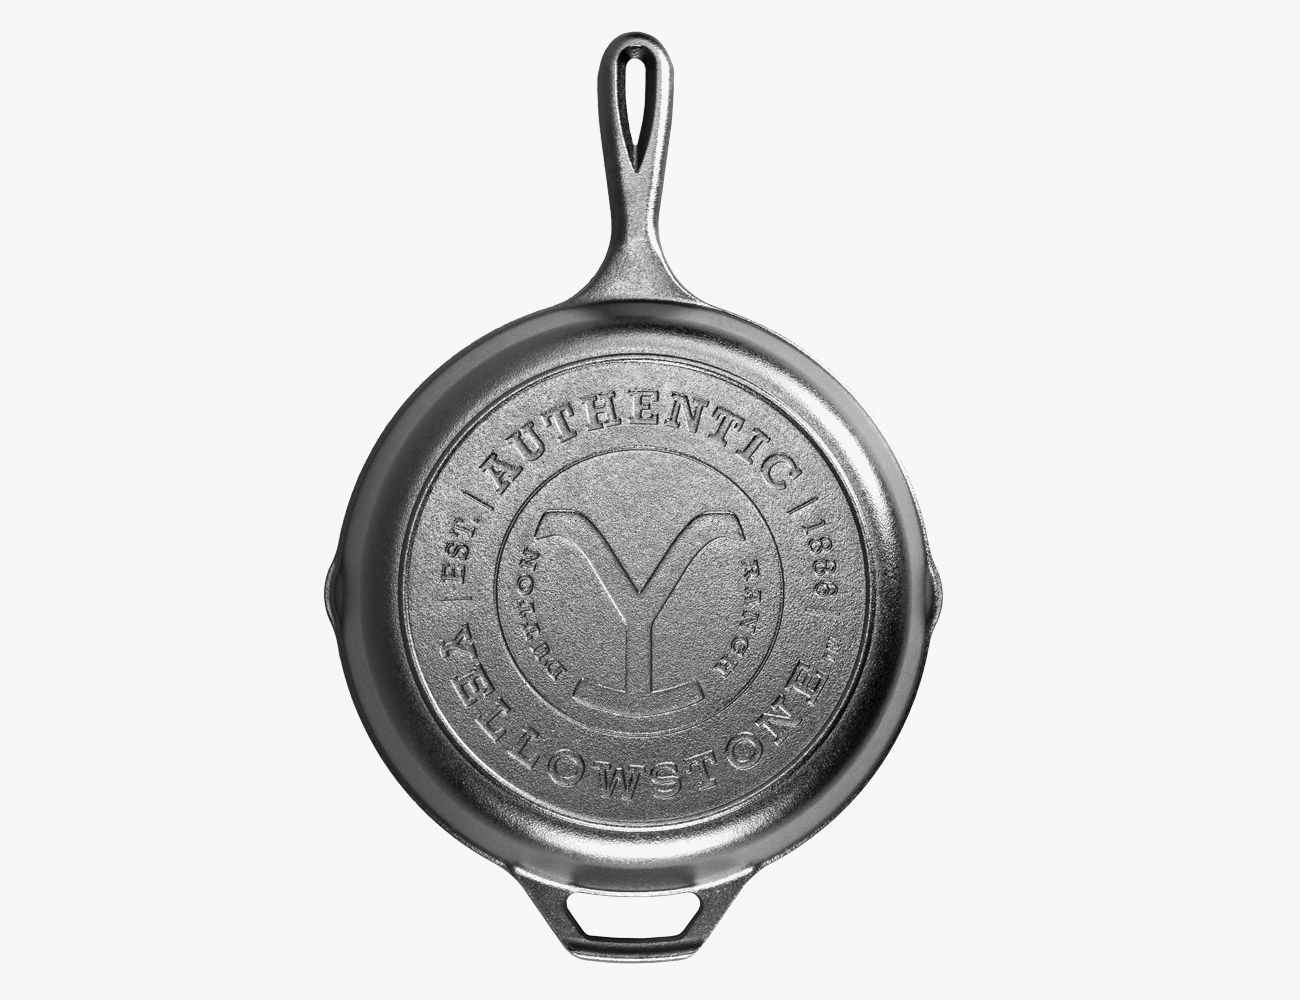 Lodge ® Cast Iron Grill Pan  Cast iron grill pan, Specialty cookware, Cast  iron cooking